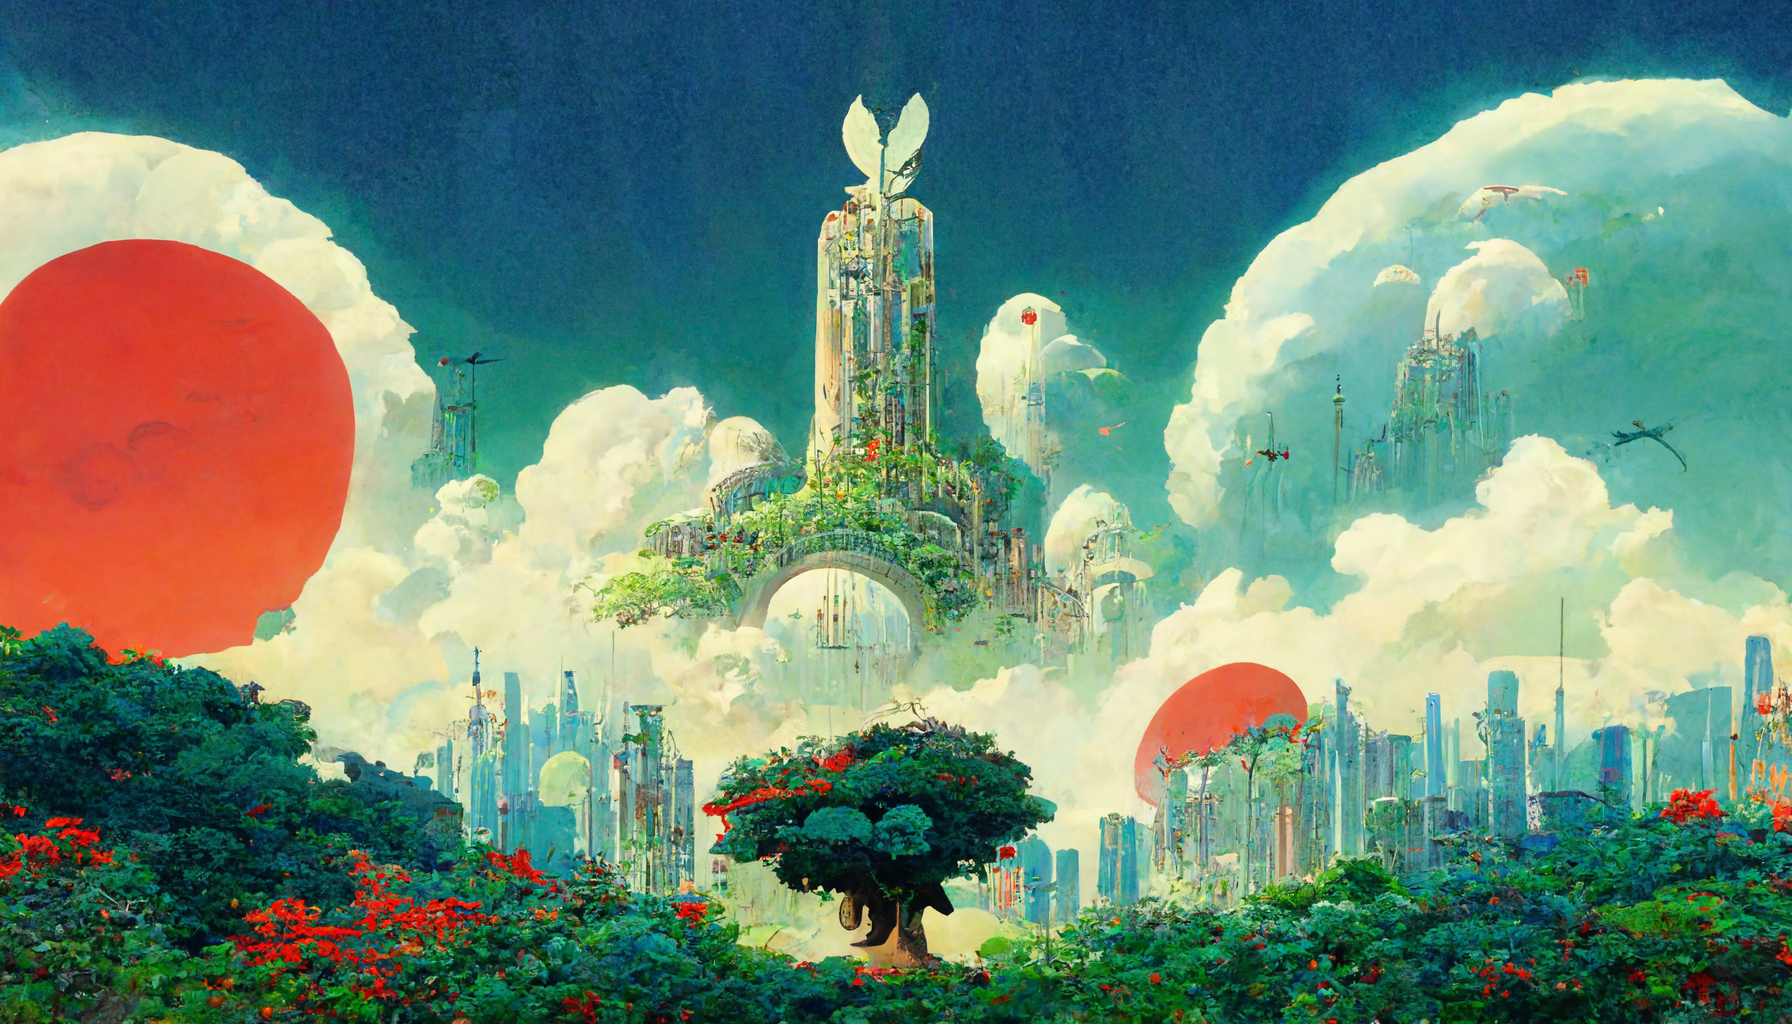 Studio Ghibli art landscape of a futuristic techno garden city with a tree of life and a phoenix in the sky (Midjourney)